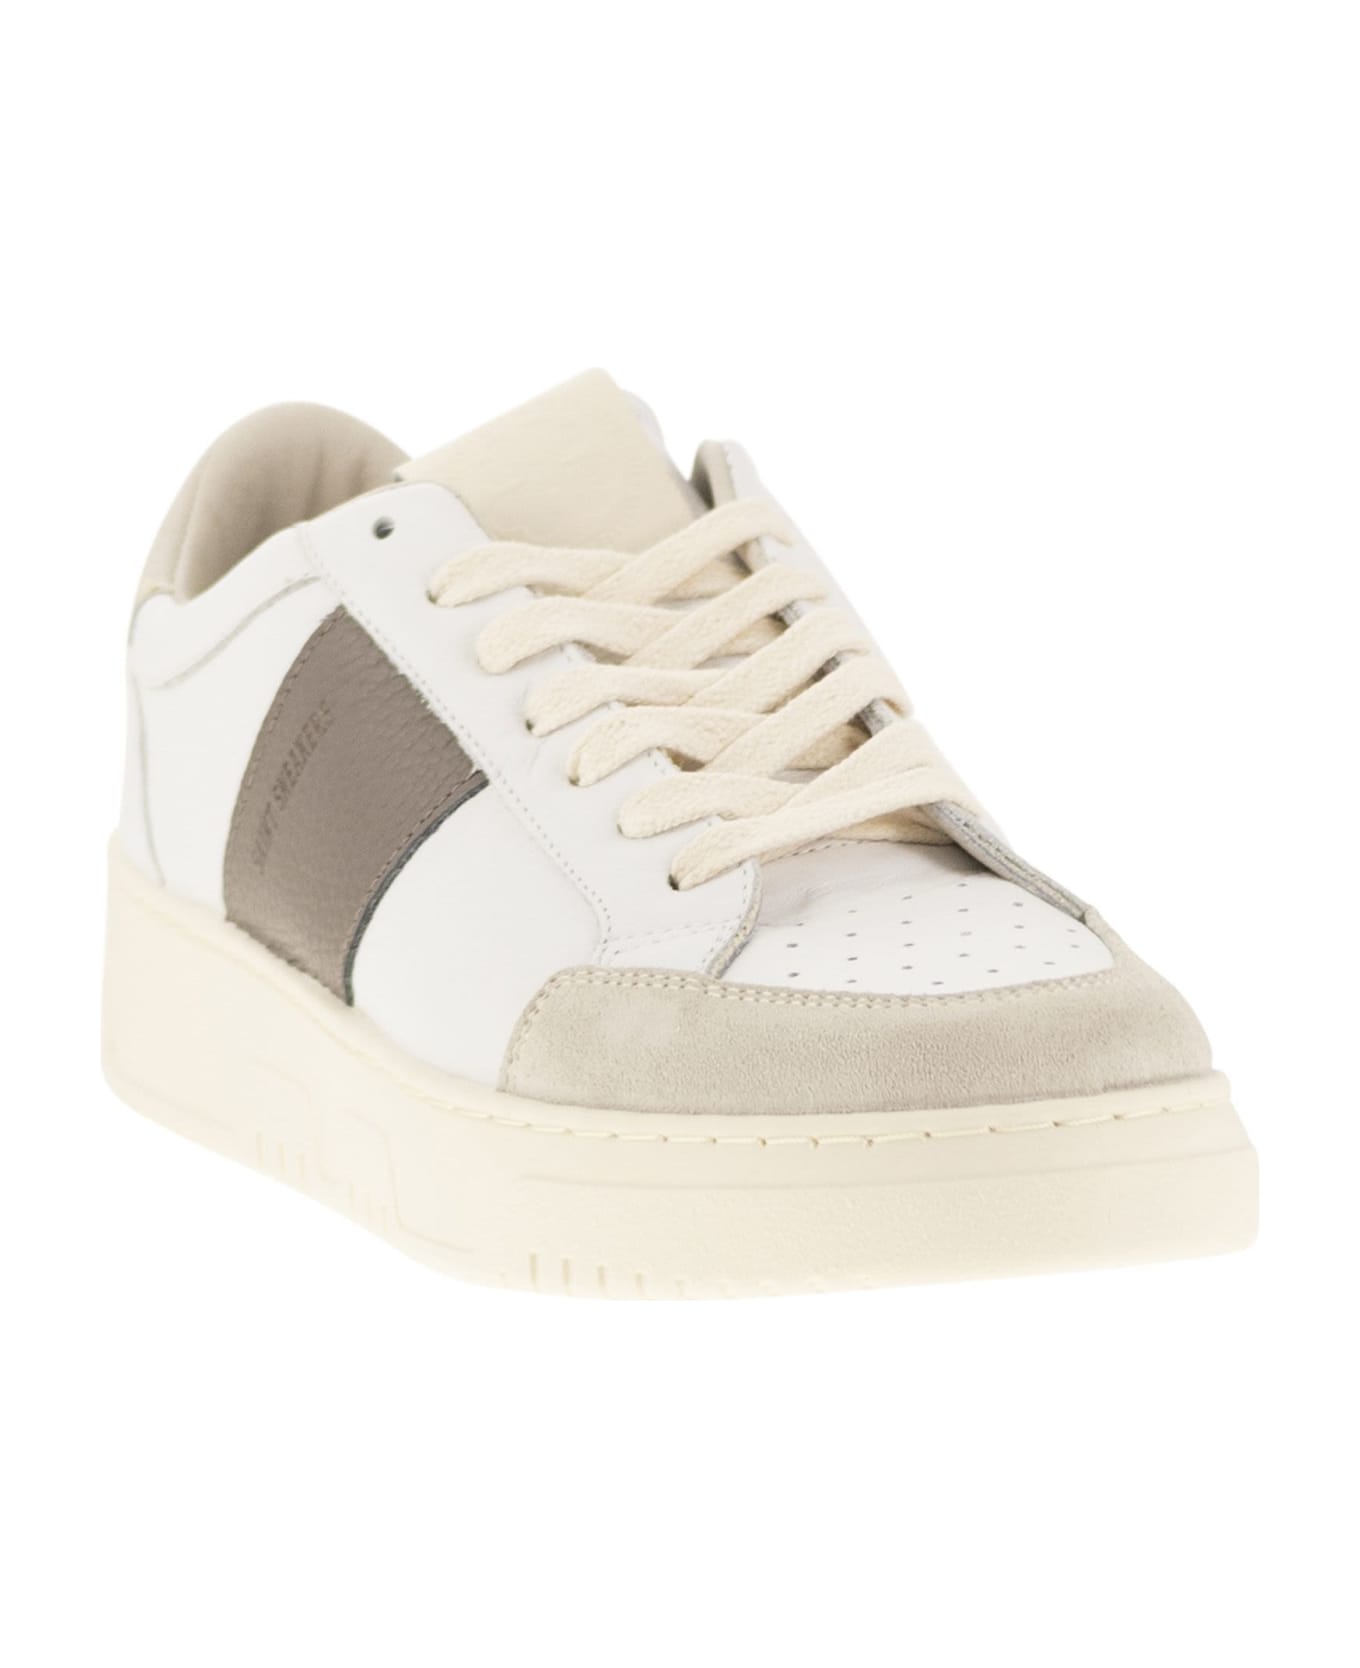 Saint Sneakers Sail - Leather And Suede Trainers - White/grey